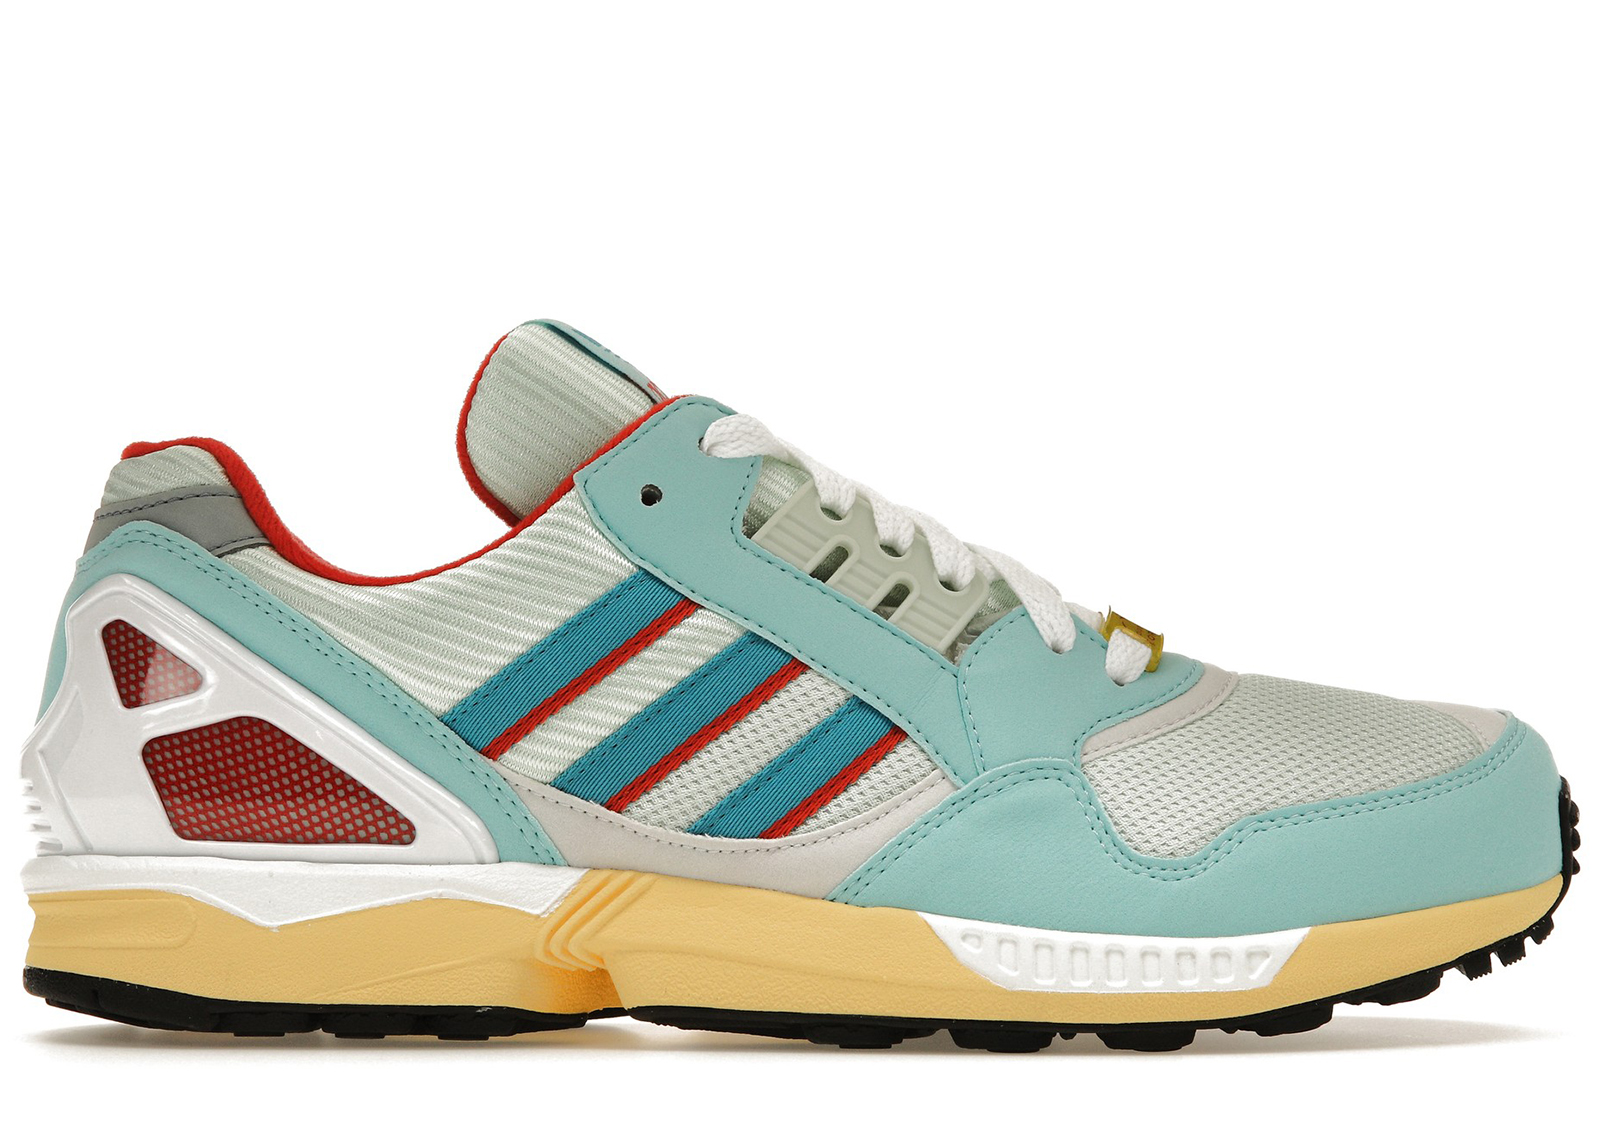 adidas ZX 9000 Turquoise Red Men's - G97754 - US